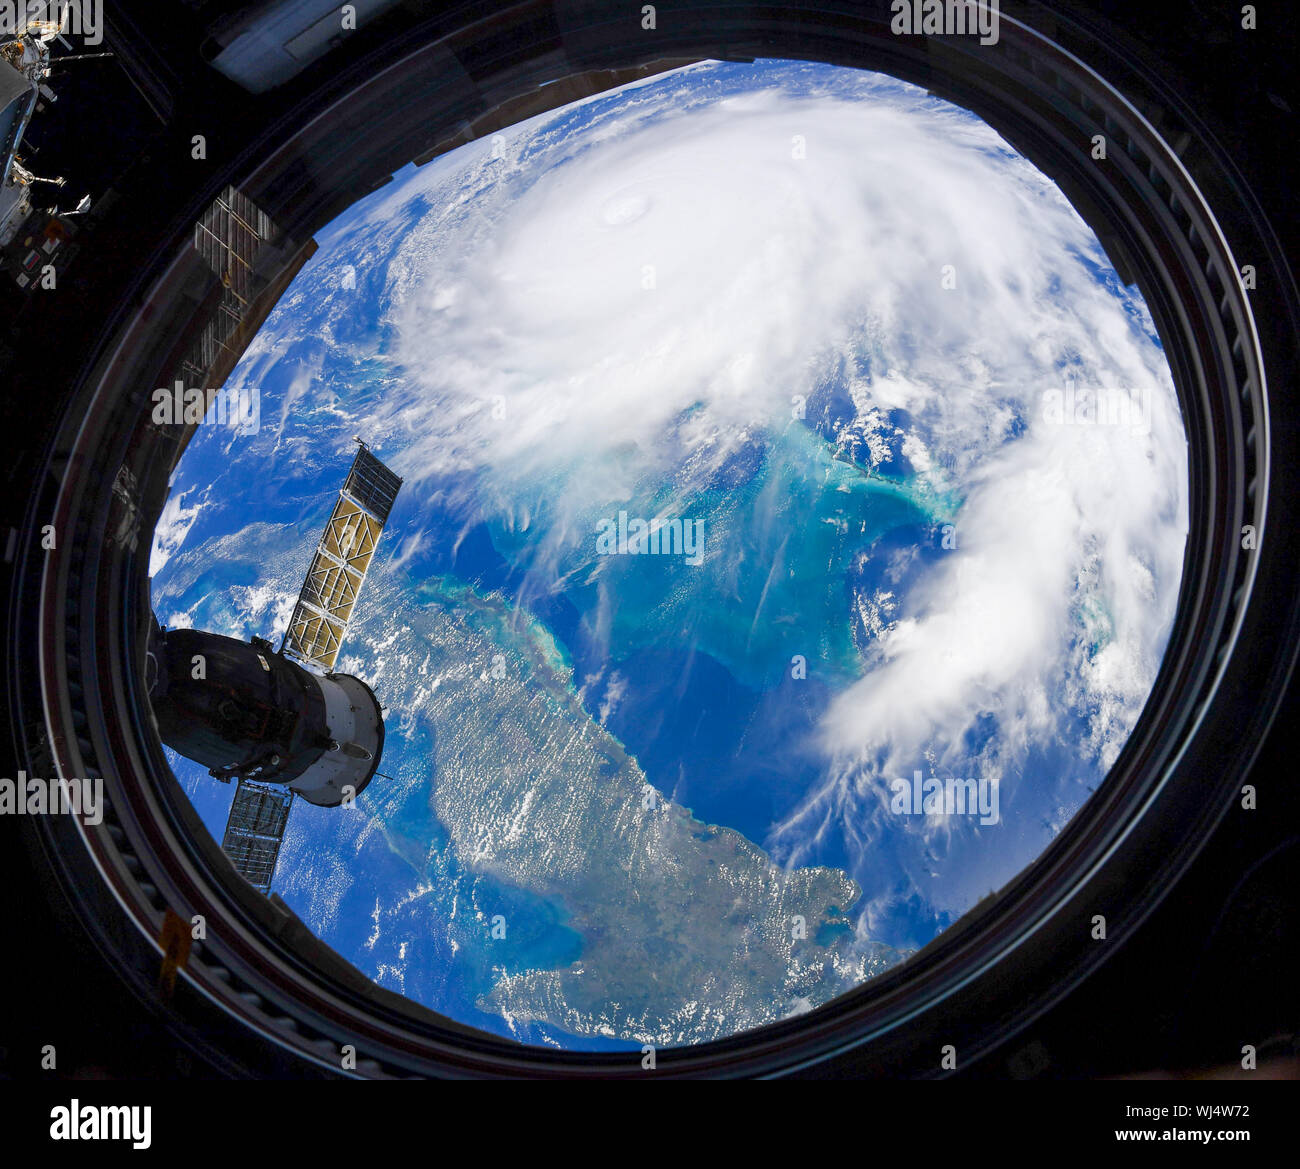 Hurricane Dorian seen from the ISS. September 2, 2019. The image is a handout from NASA Stock Photo